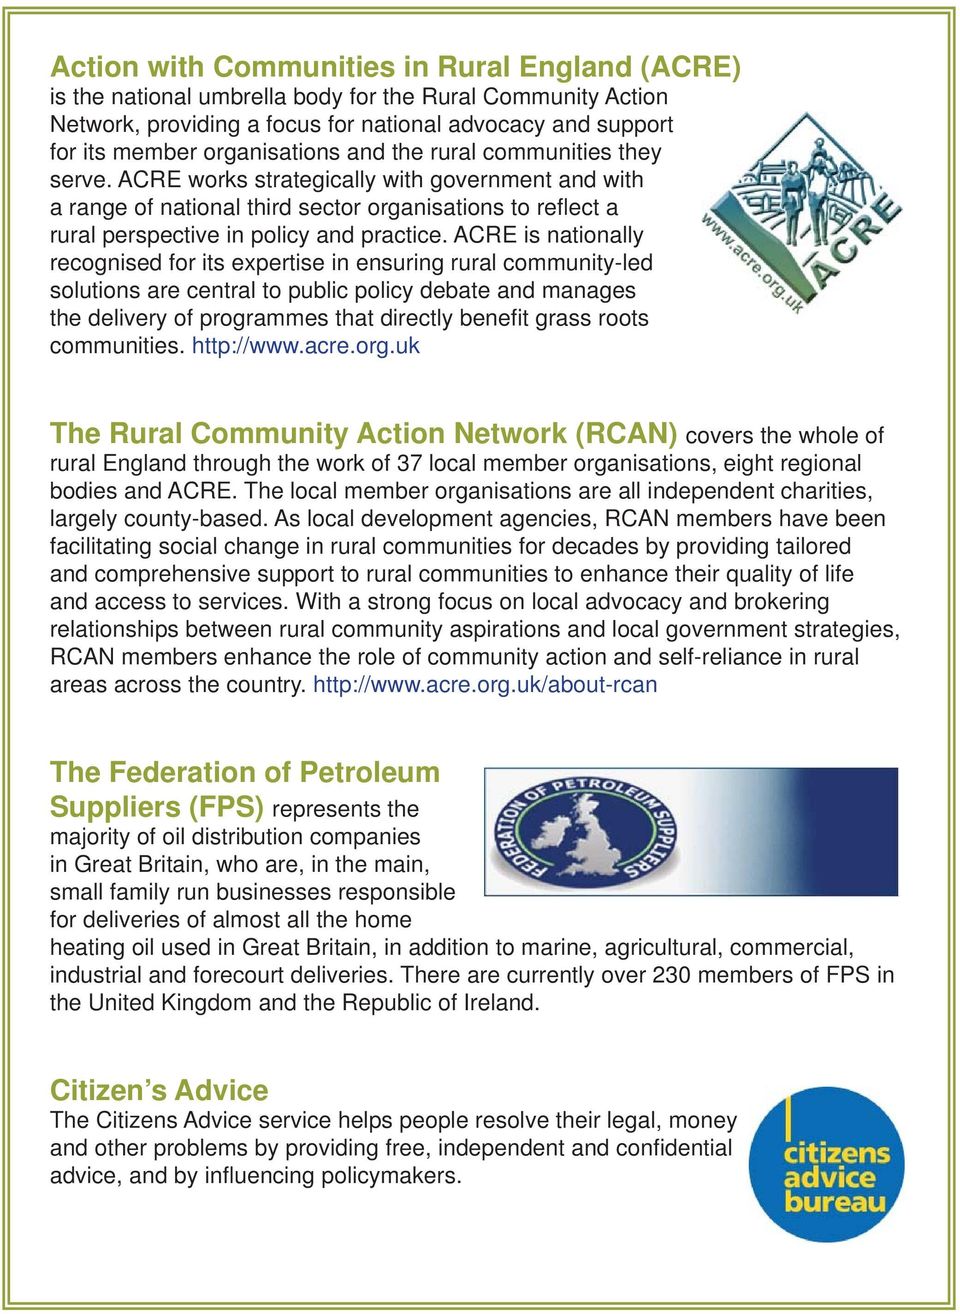 ACRE is nationally recognised for its expertise in ensuring rural community-led solutions are central to public policy debate and manages the delivery of programmes that directly benefi t grass roots